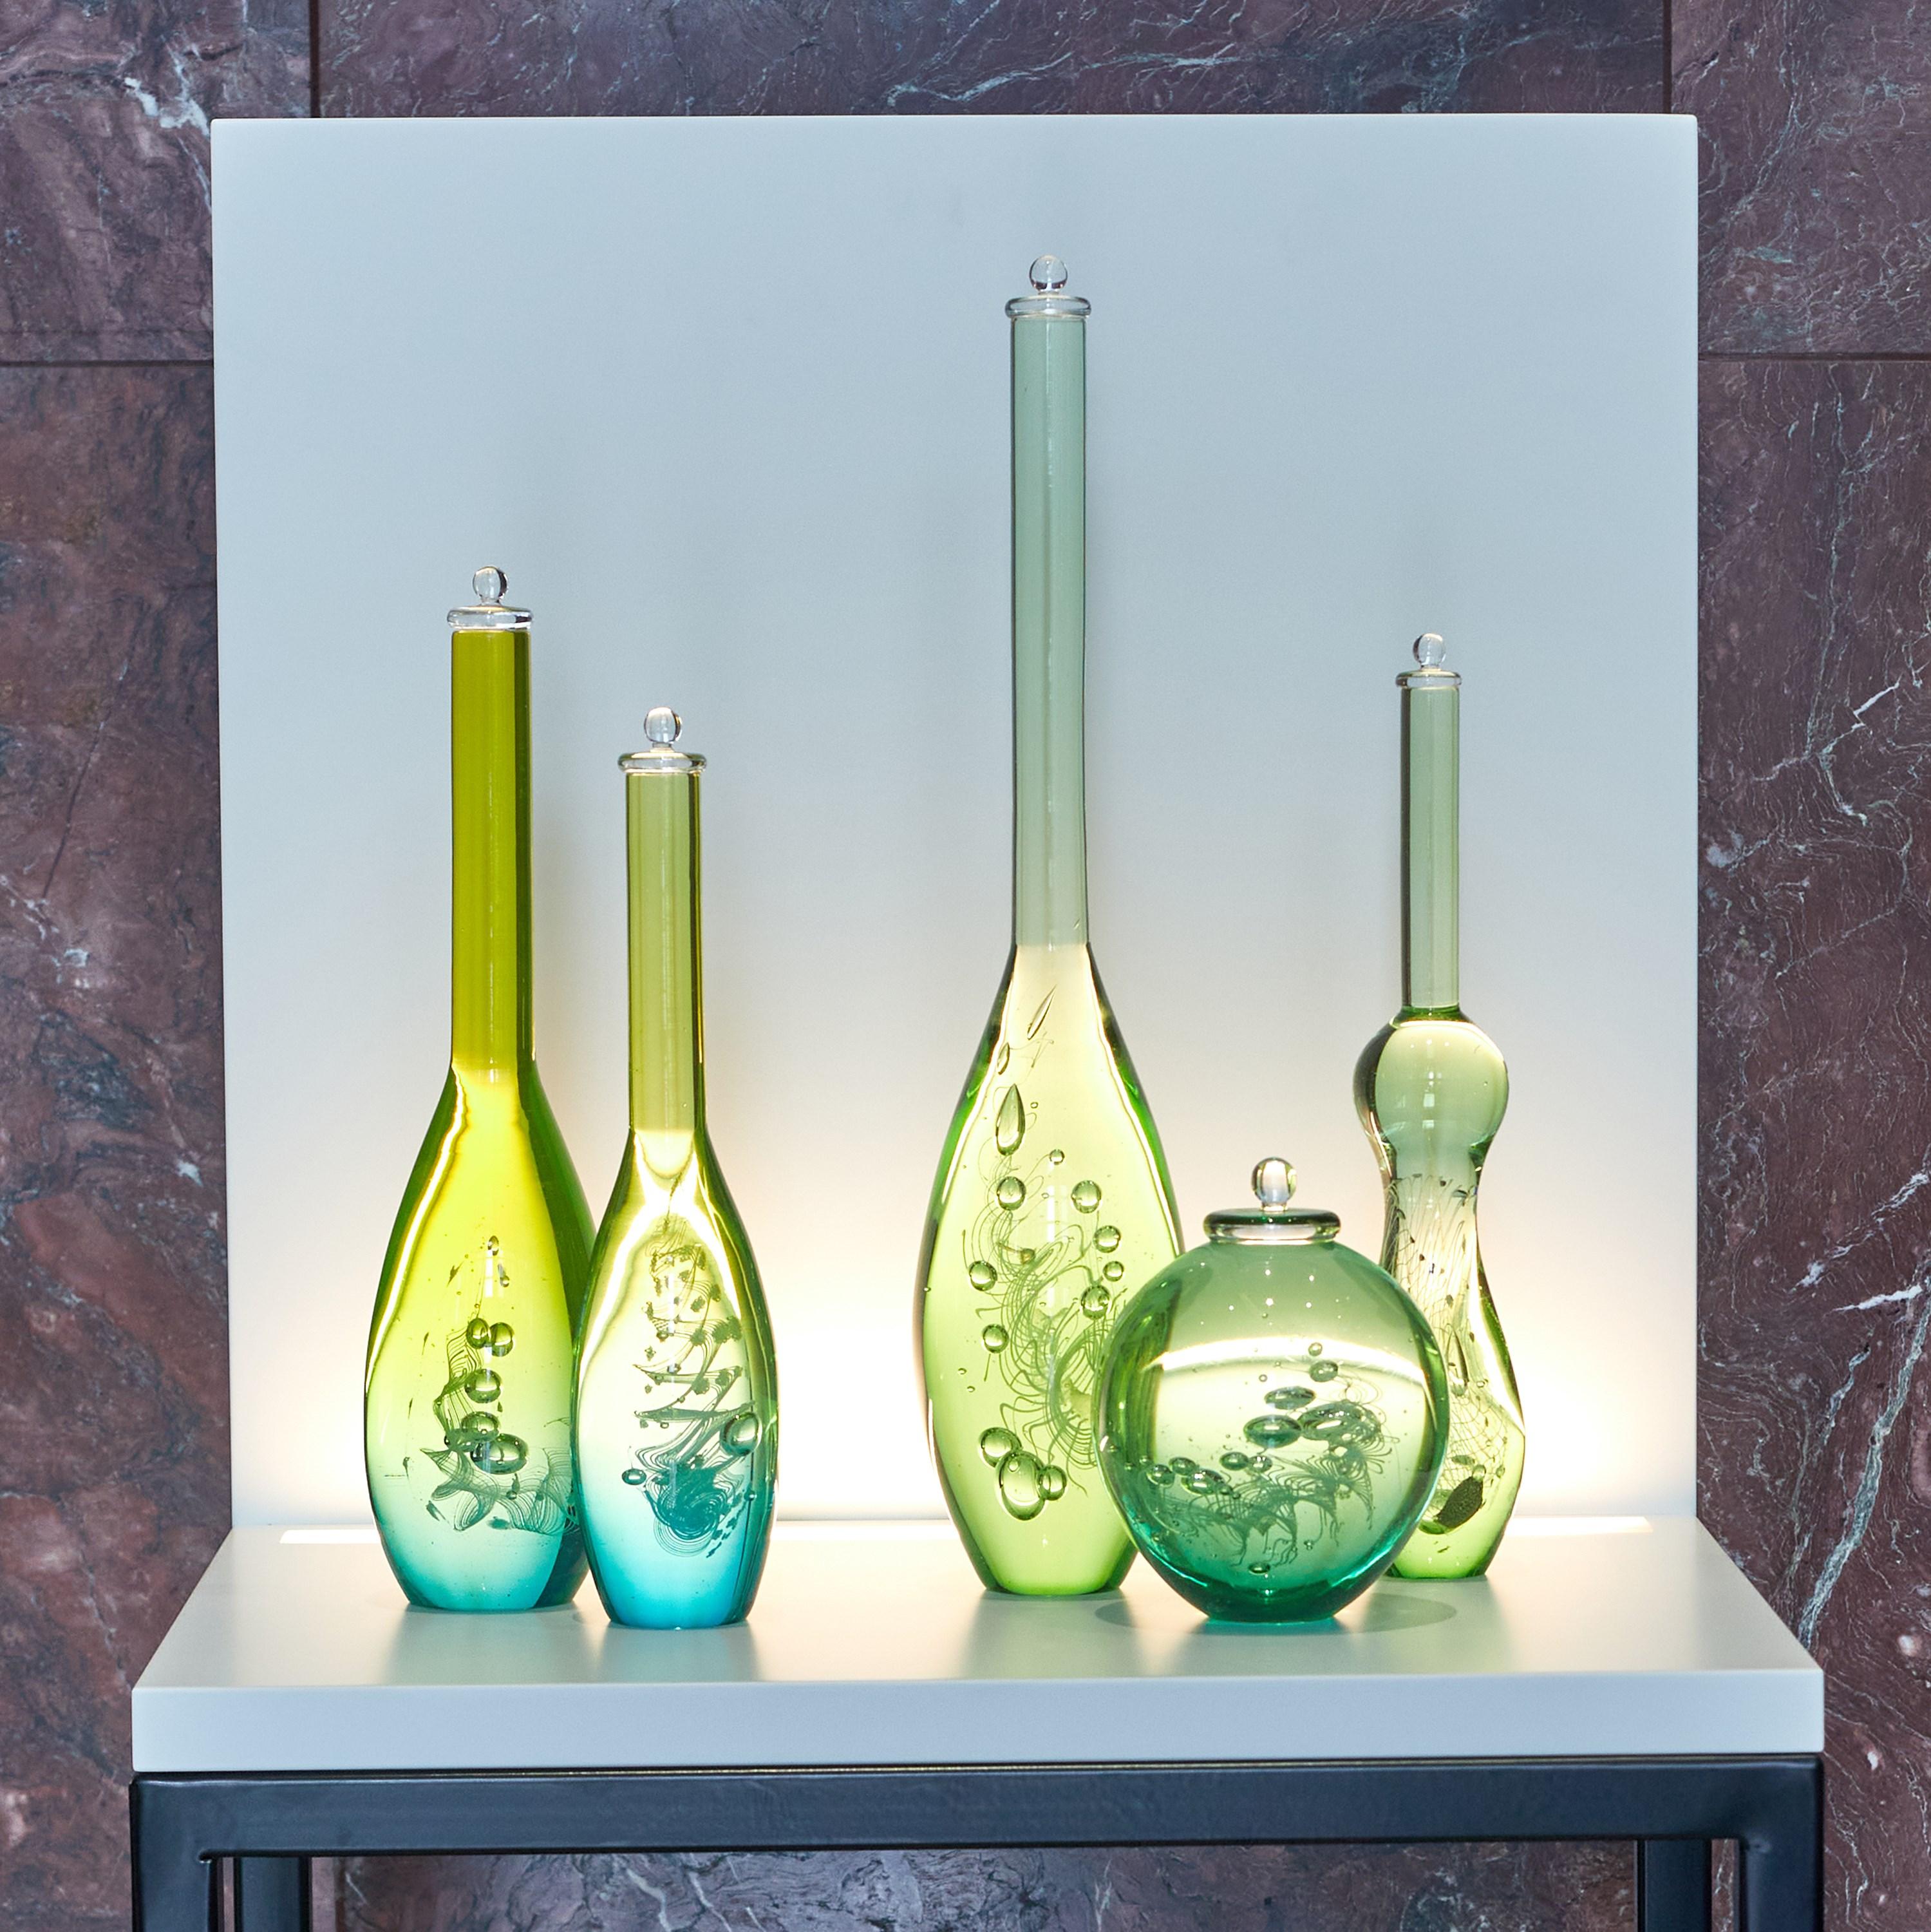 Organic Modern Dna Sequence iii, a Green & Aqua Glass Bottle Installation by Louis Thompson For Sale